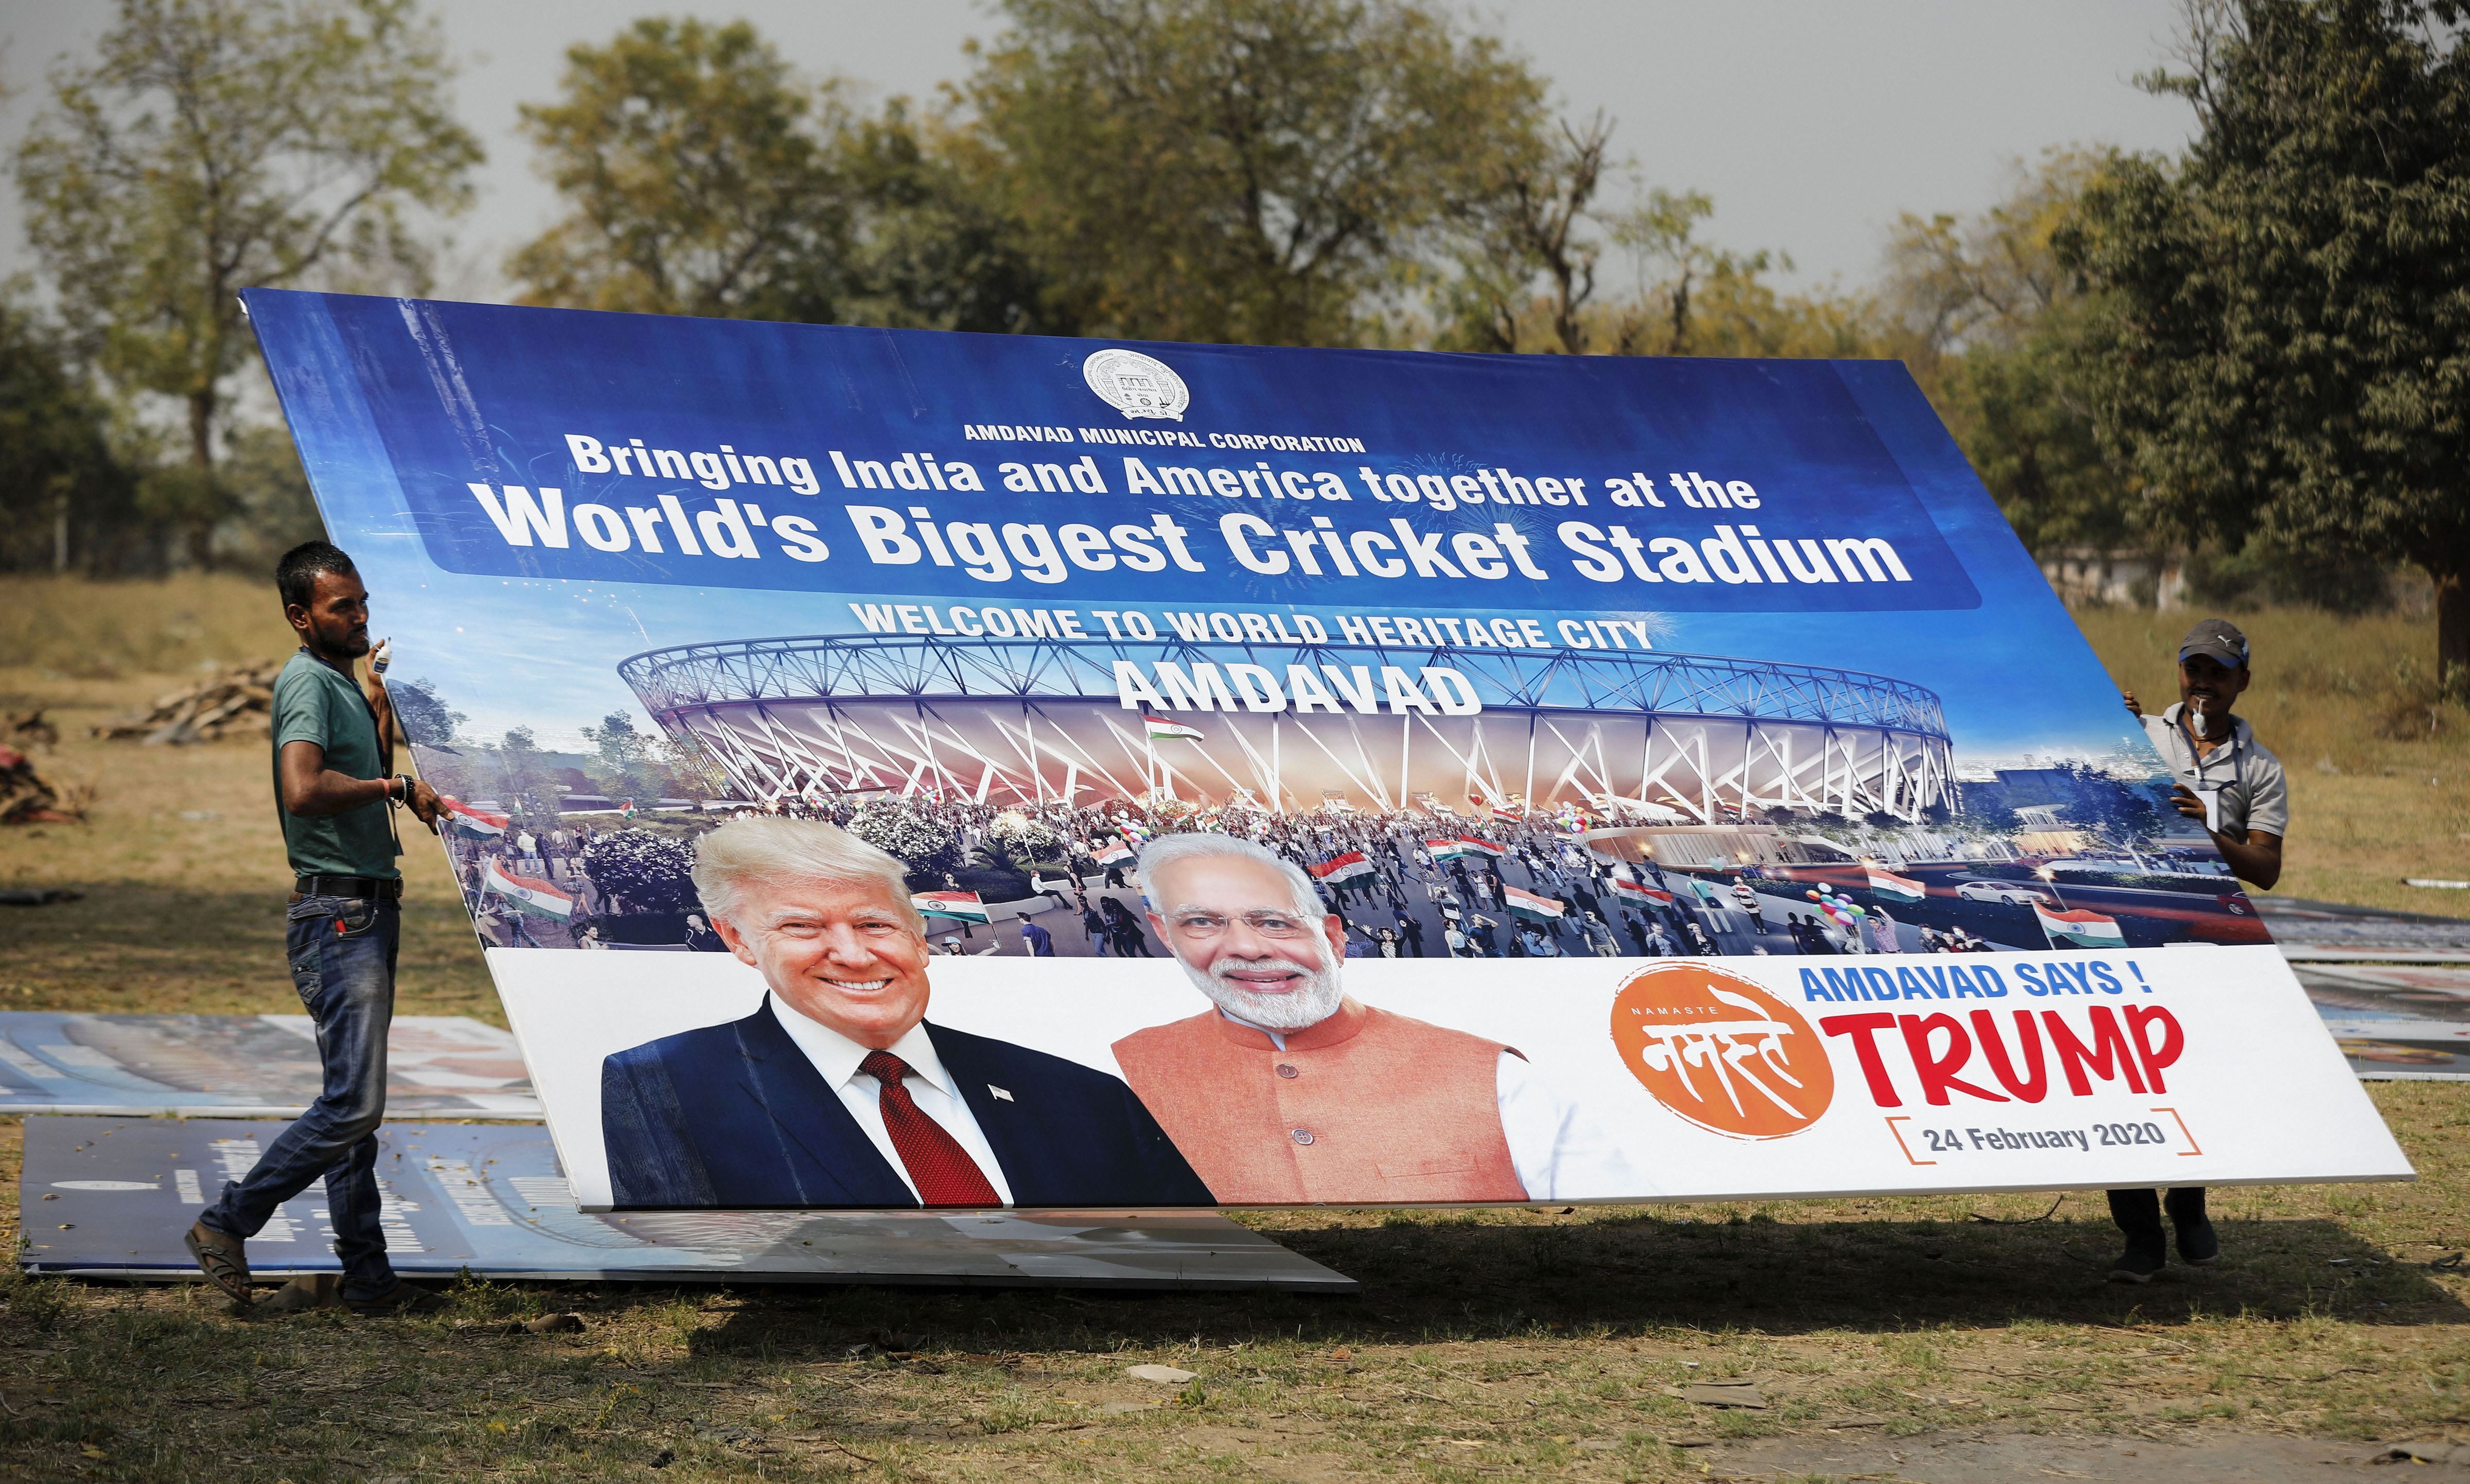 Workers carry a hoarding with pictures of Prime Minister Narendra Modi and US President Donald Trump as preparations are underway for the 'Namaste Trump' event, in Ahmedabad, Wednesday, February 19, 2020